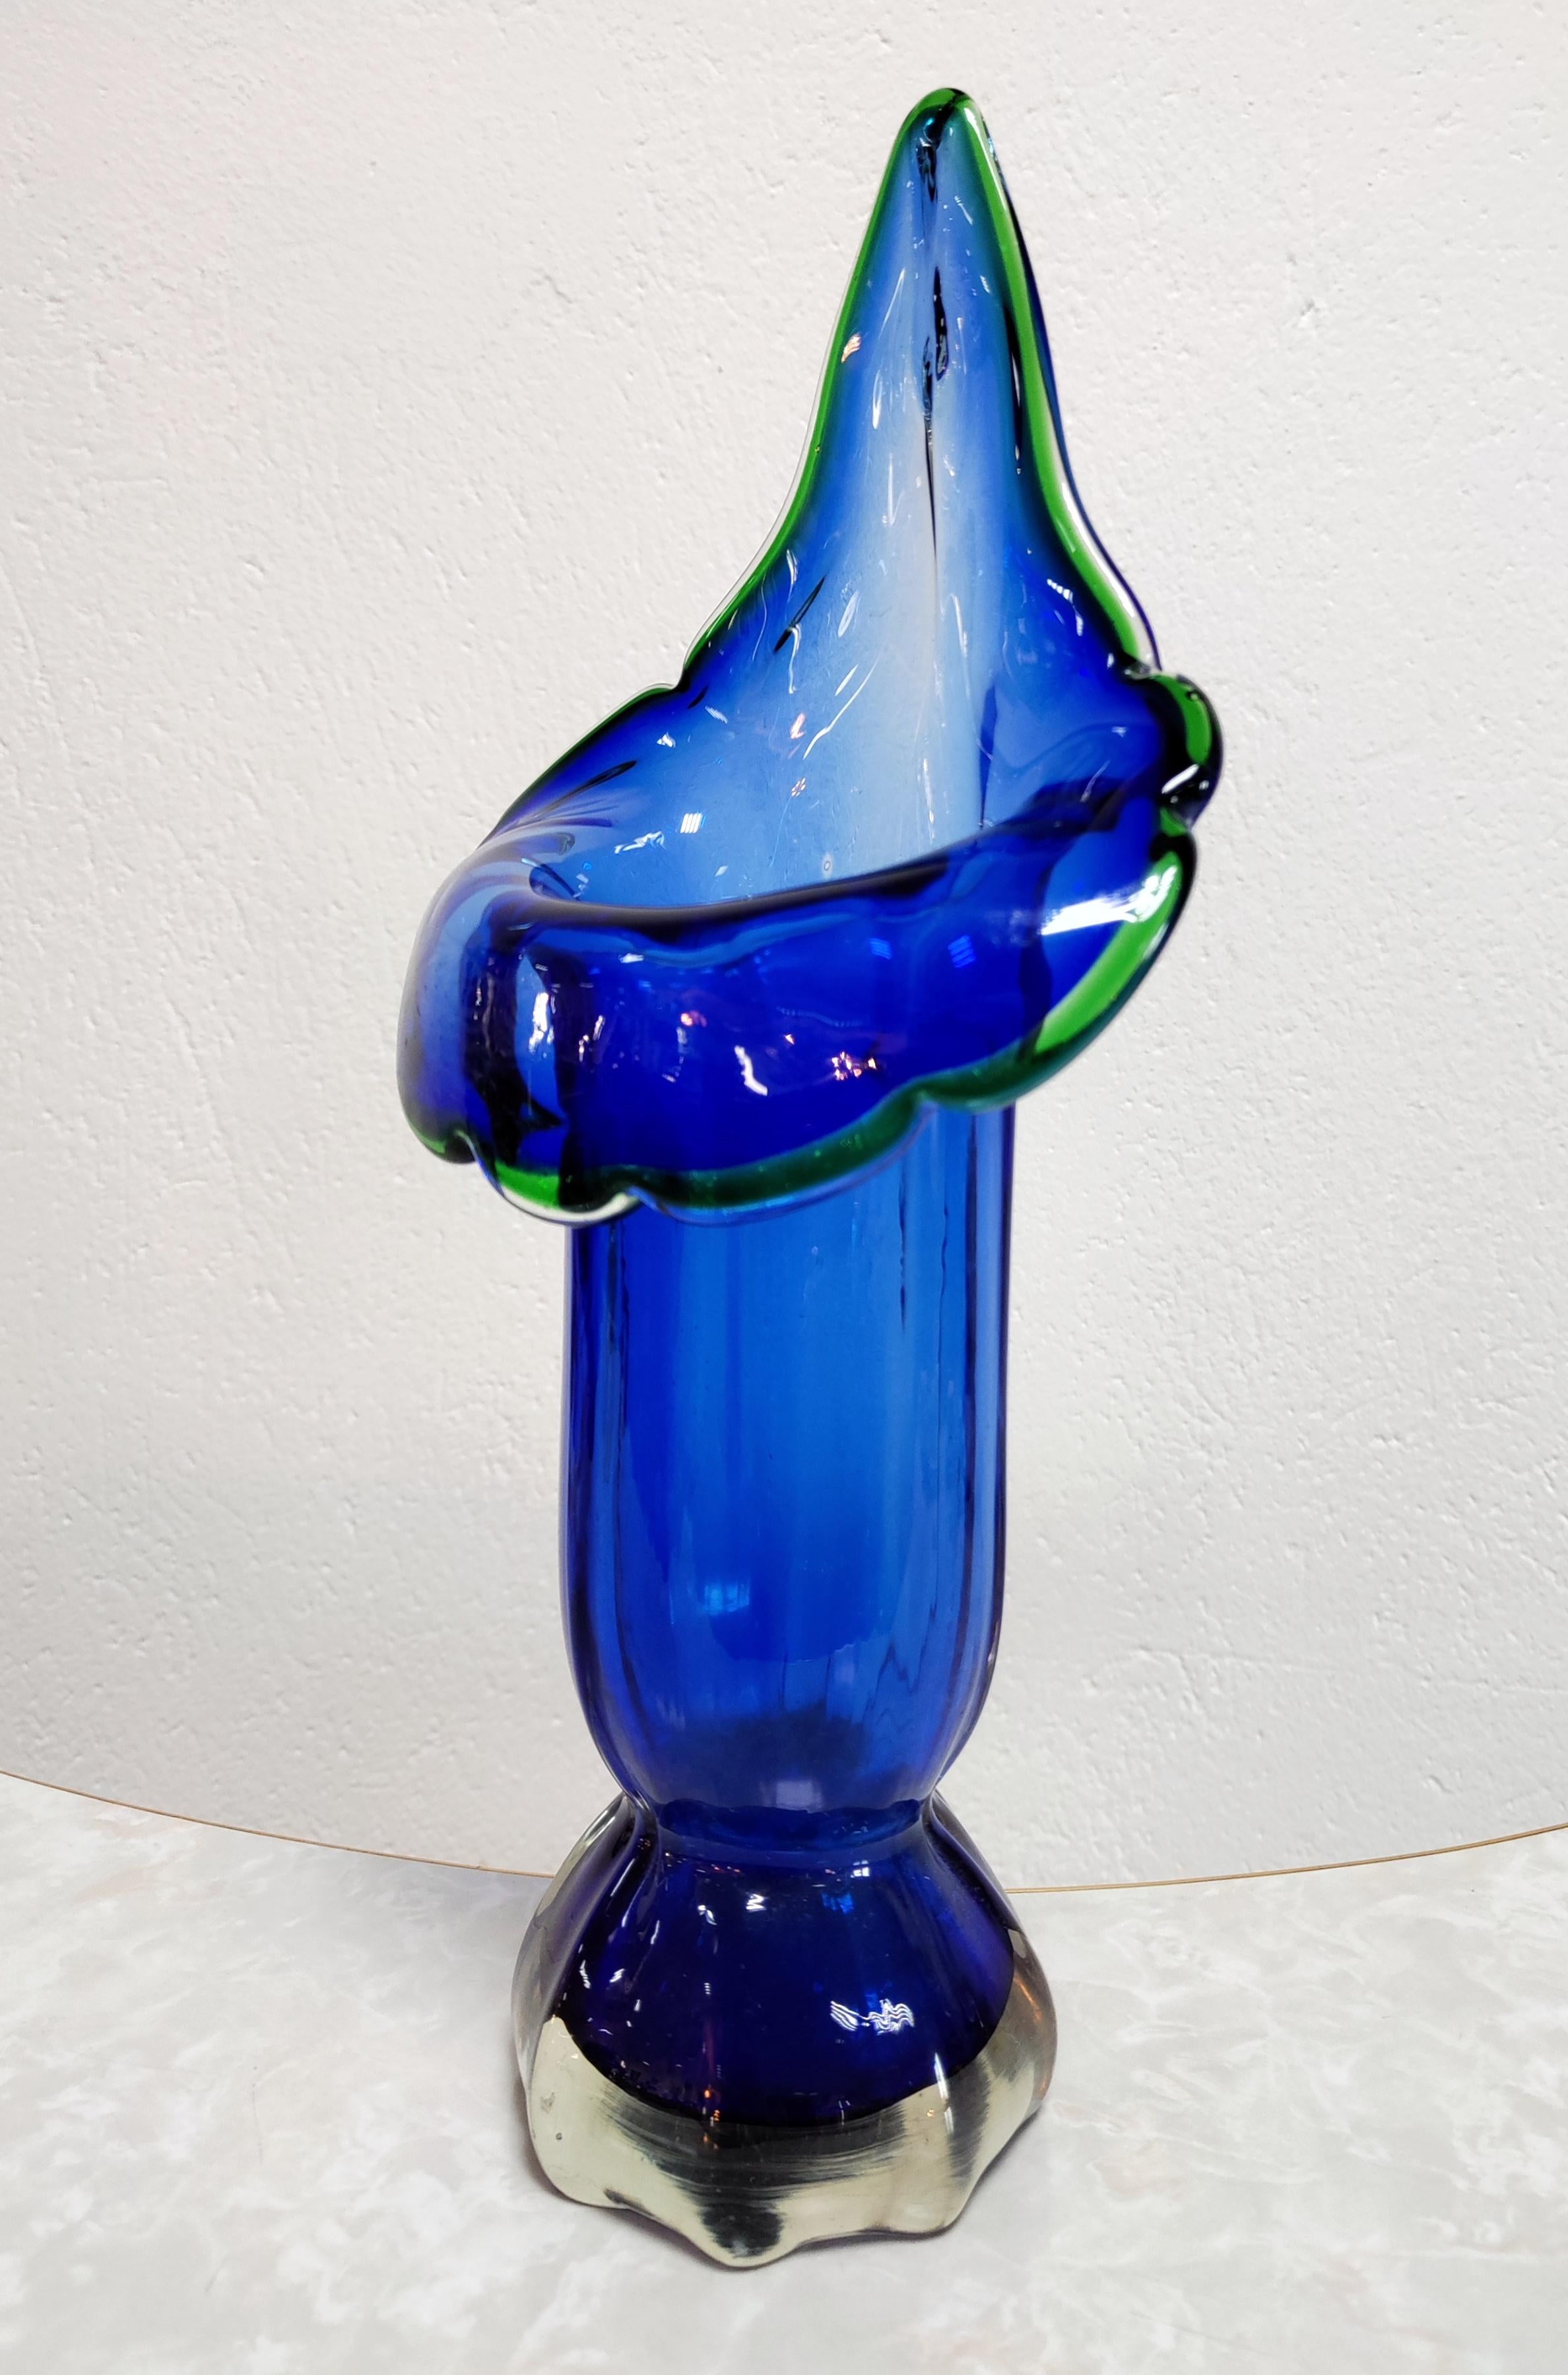 Art Glass Blue Mid-Century Modern Murano Glass Vase Shaped as Calla Lily, Italy, 1960s For Sale